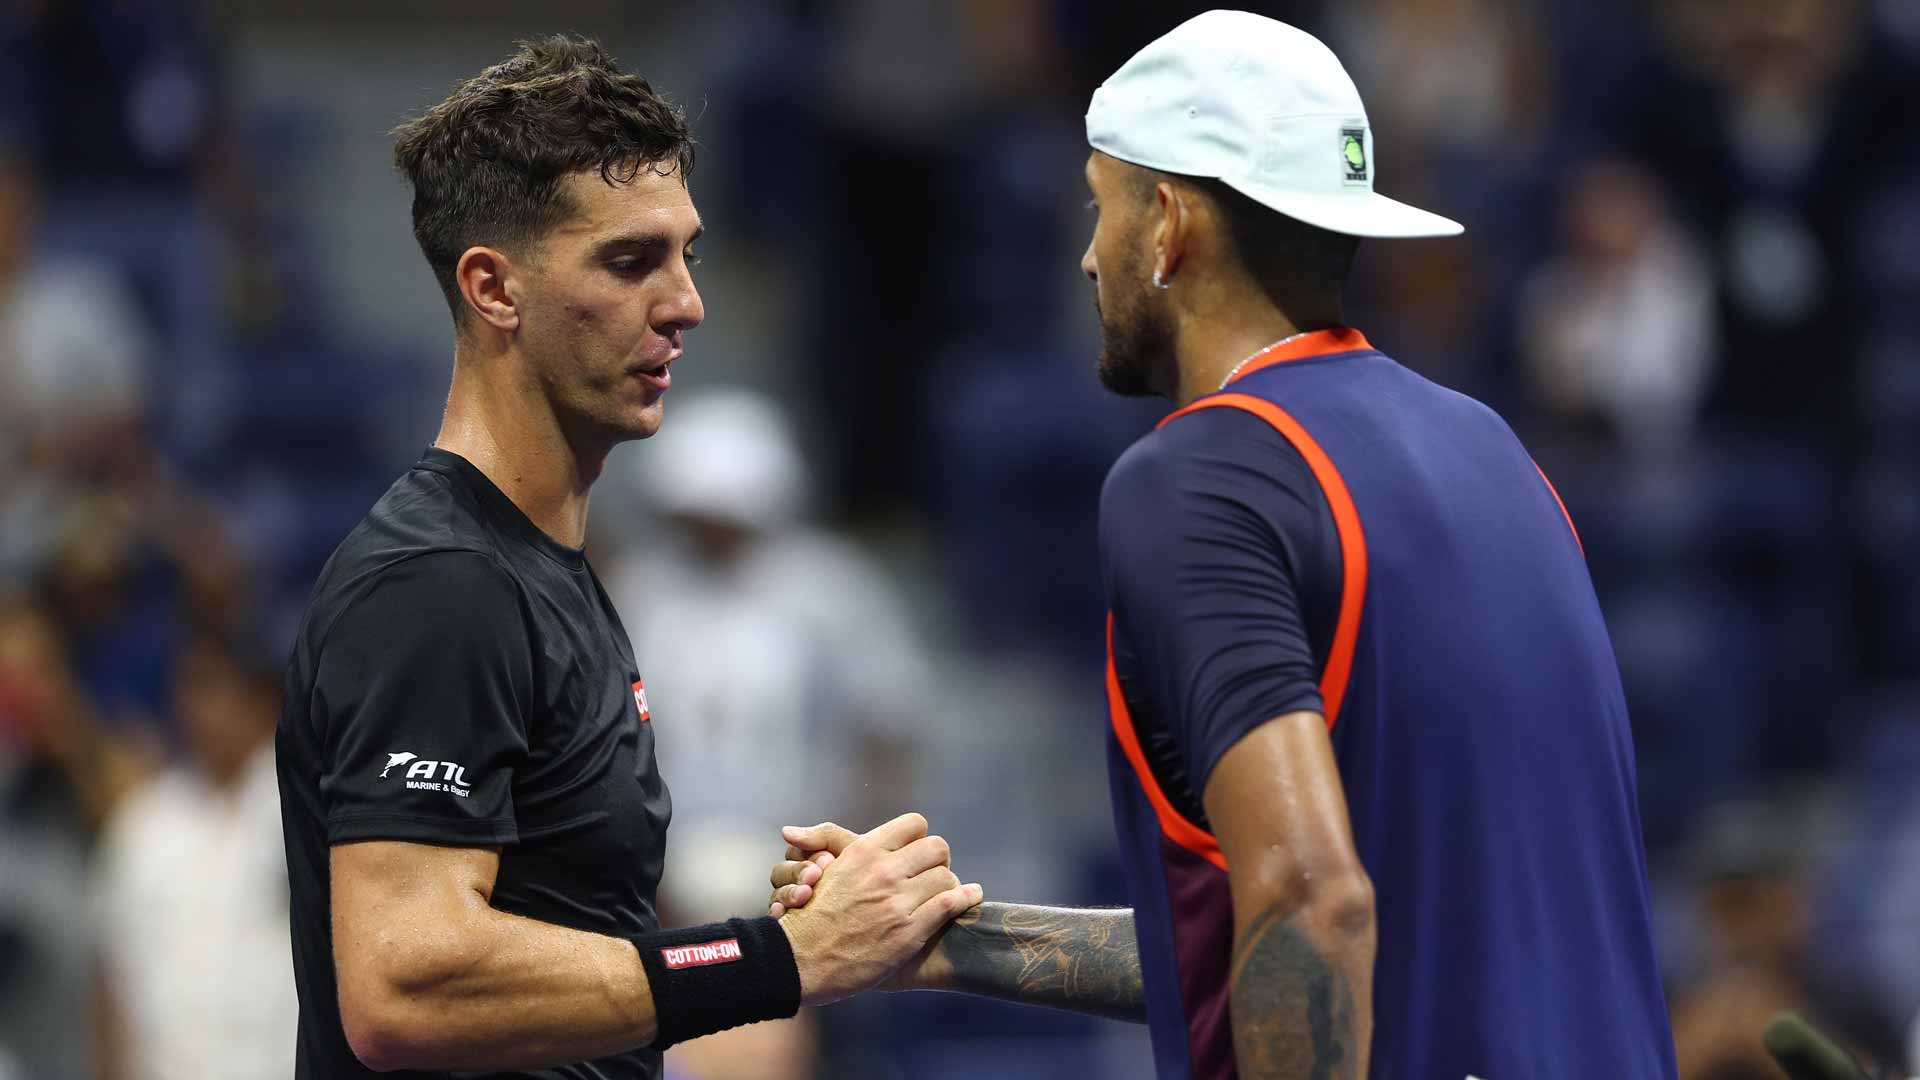 Close friends Kokkinakis and Kyrgios encountered each other in the <a href=